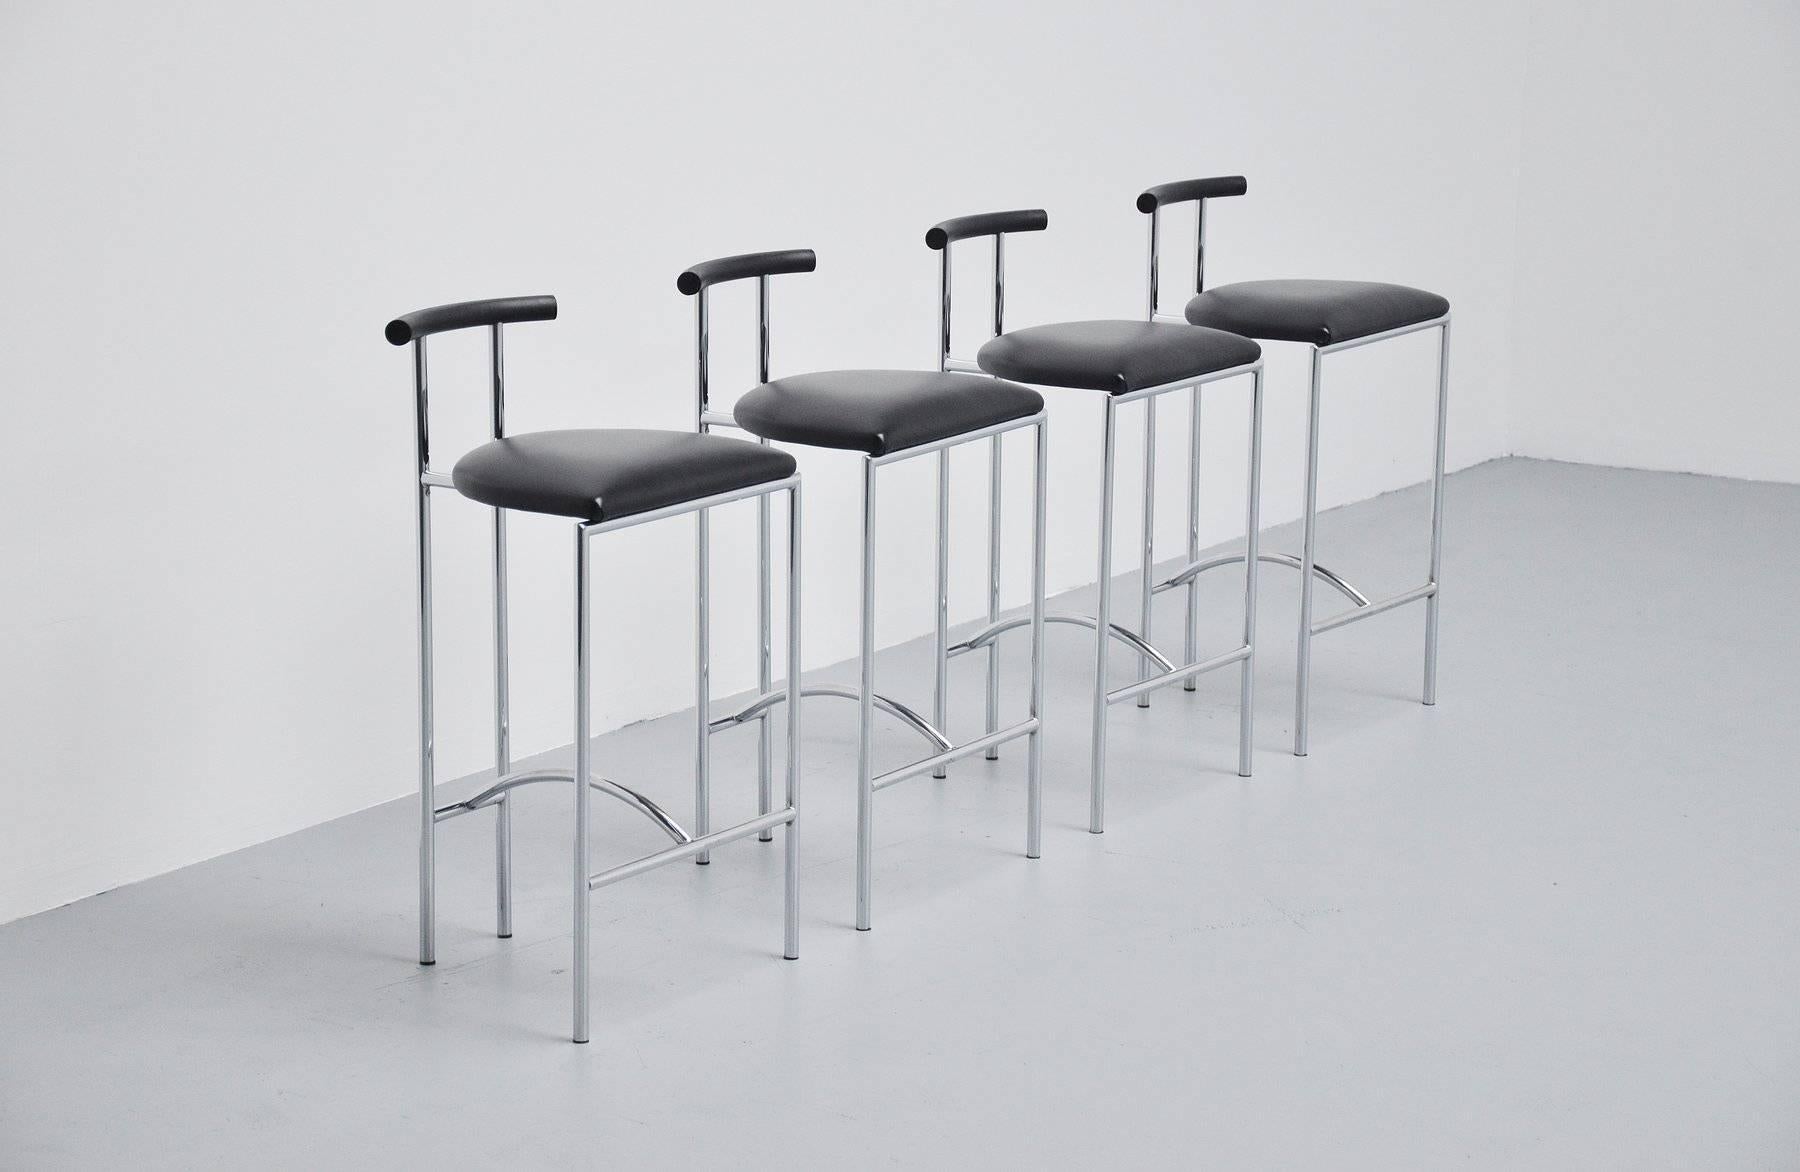 Very nice set of four bar stools designed by Rodney Kinsman, manufactured by Bieffeplast, Italy 1985. These stools has a chrome-plated tubular metal frame and have a black rubber backrest and black leather upholstered seat. These stools seat very